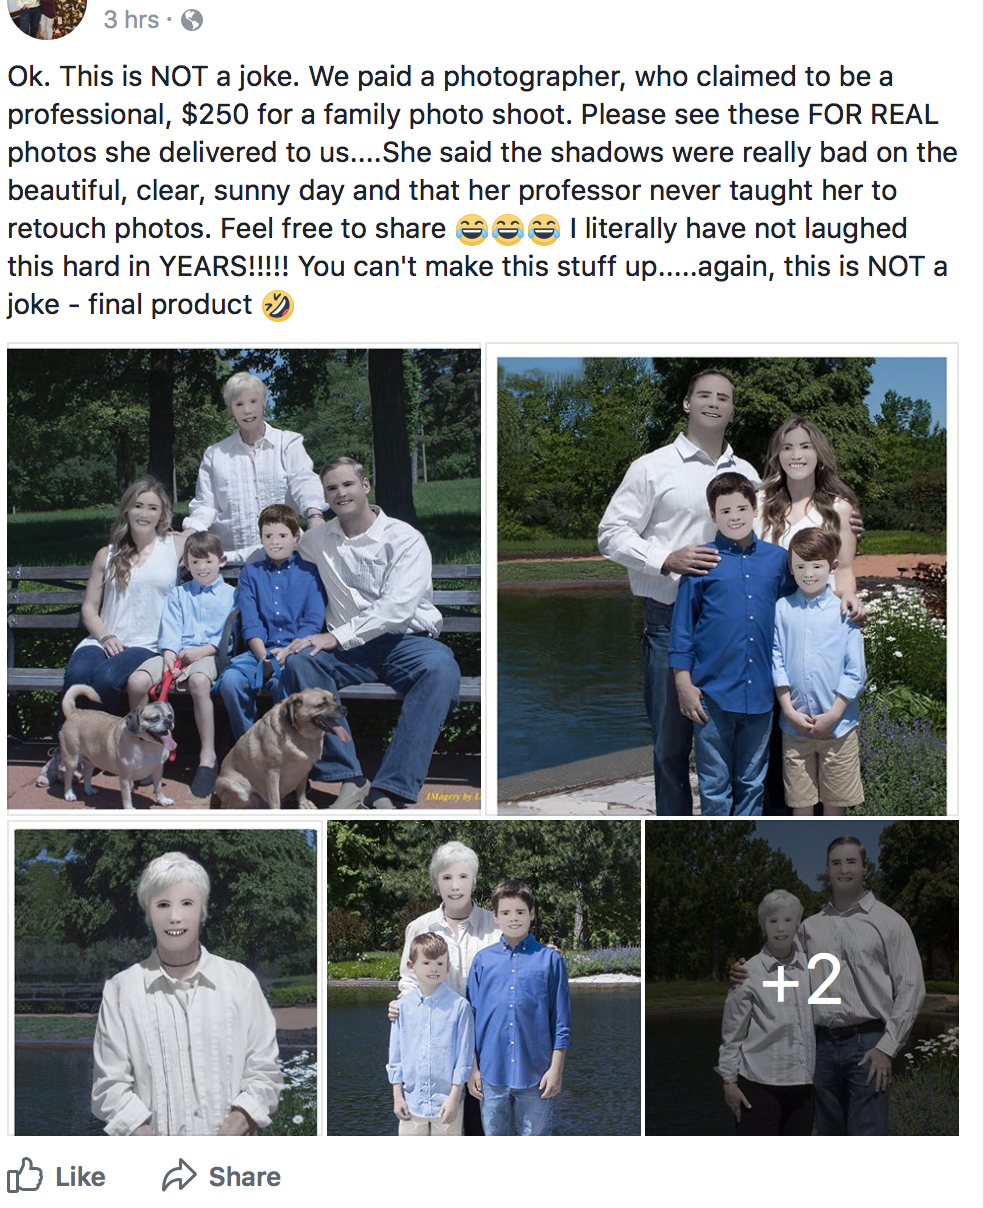 bad family photo photoshop - 3 hrs. Ok. This is Not a joke. We paid a photographer, who claimed to be a professional, $250 for a family photo shoot. Please see these For Real photos she delivered to us....She said the shadows were really bad on the beauti